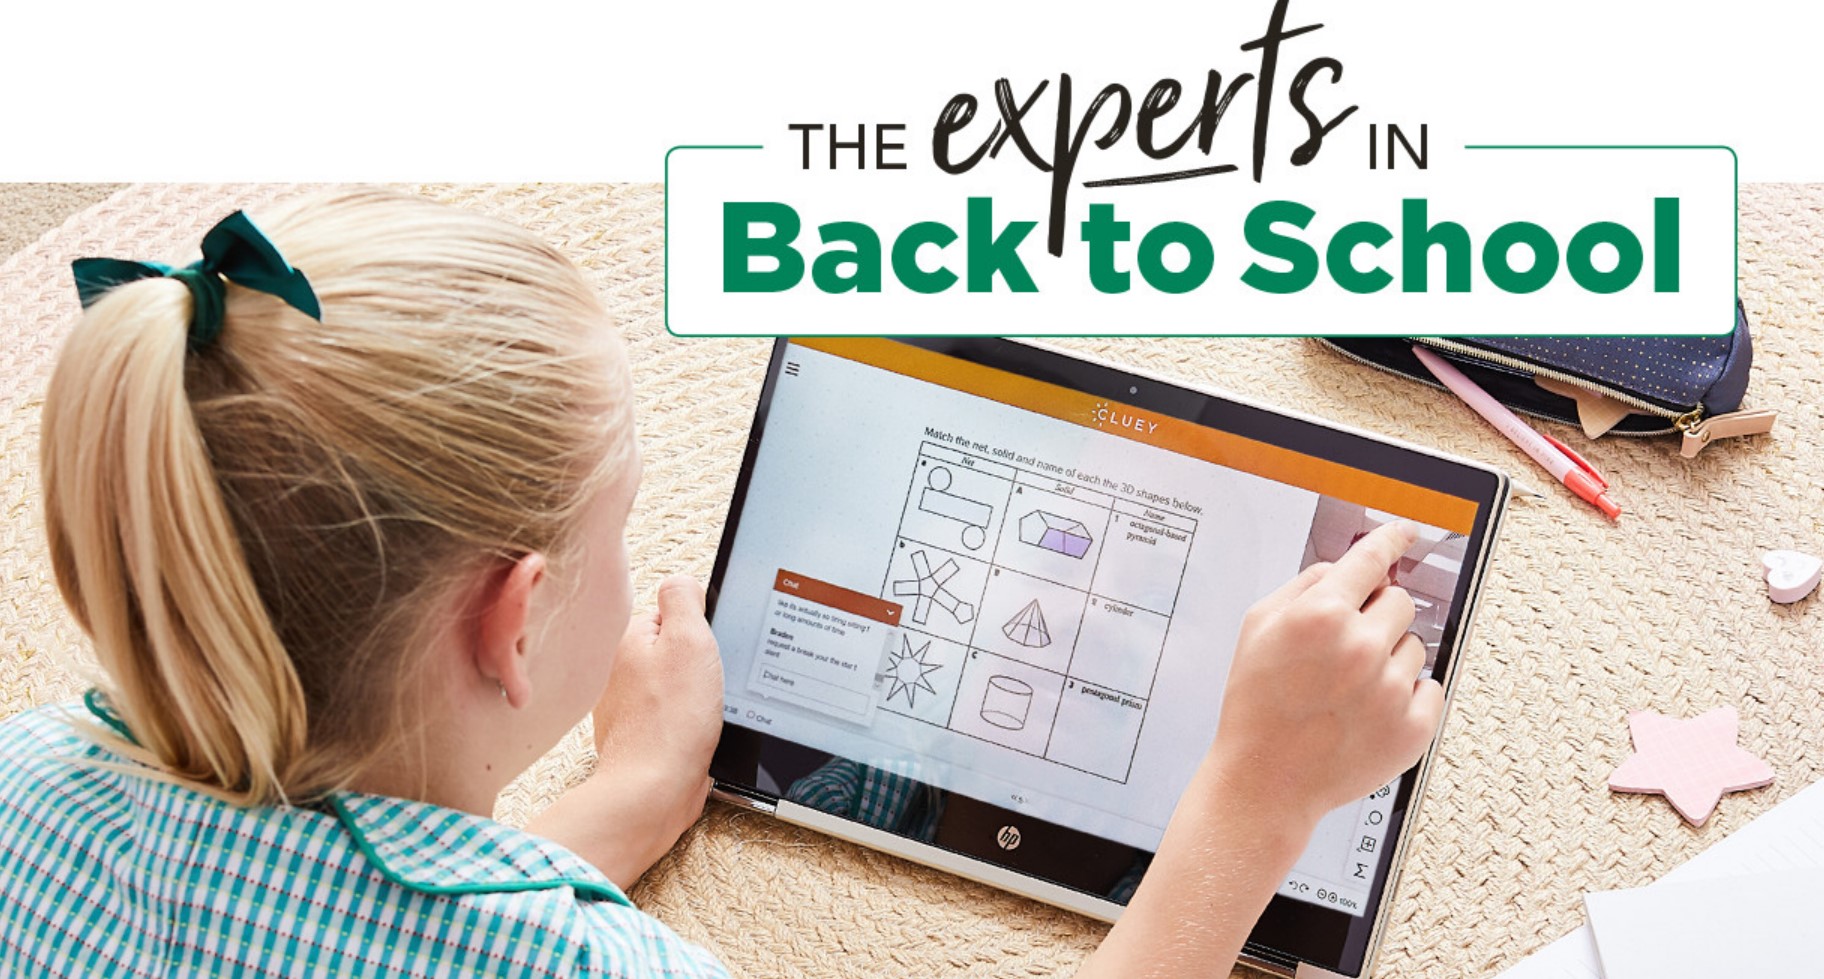 Back-to-School tech accessories from Harvey Norman